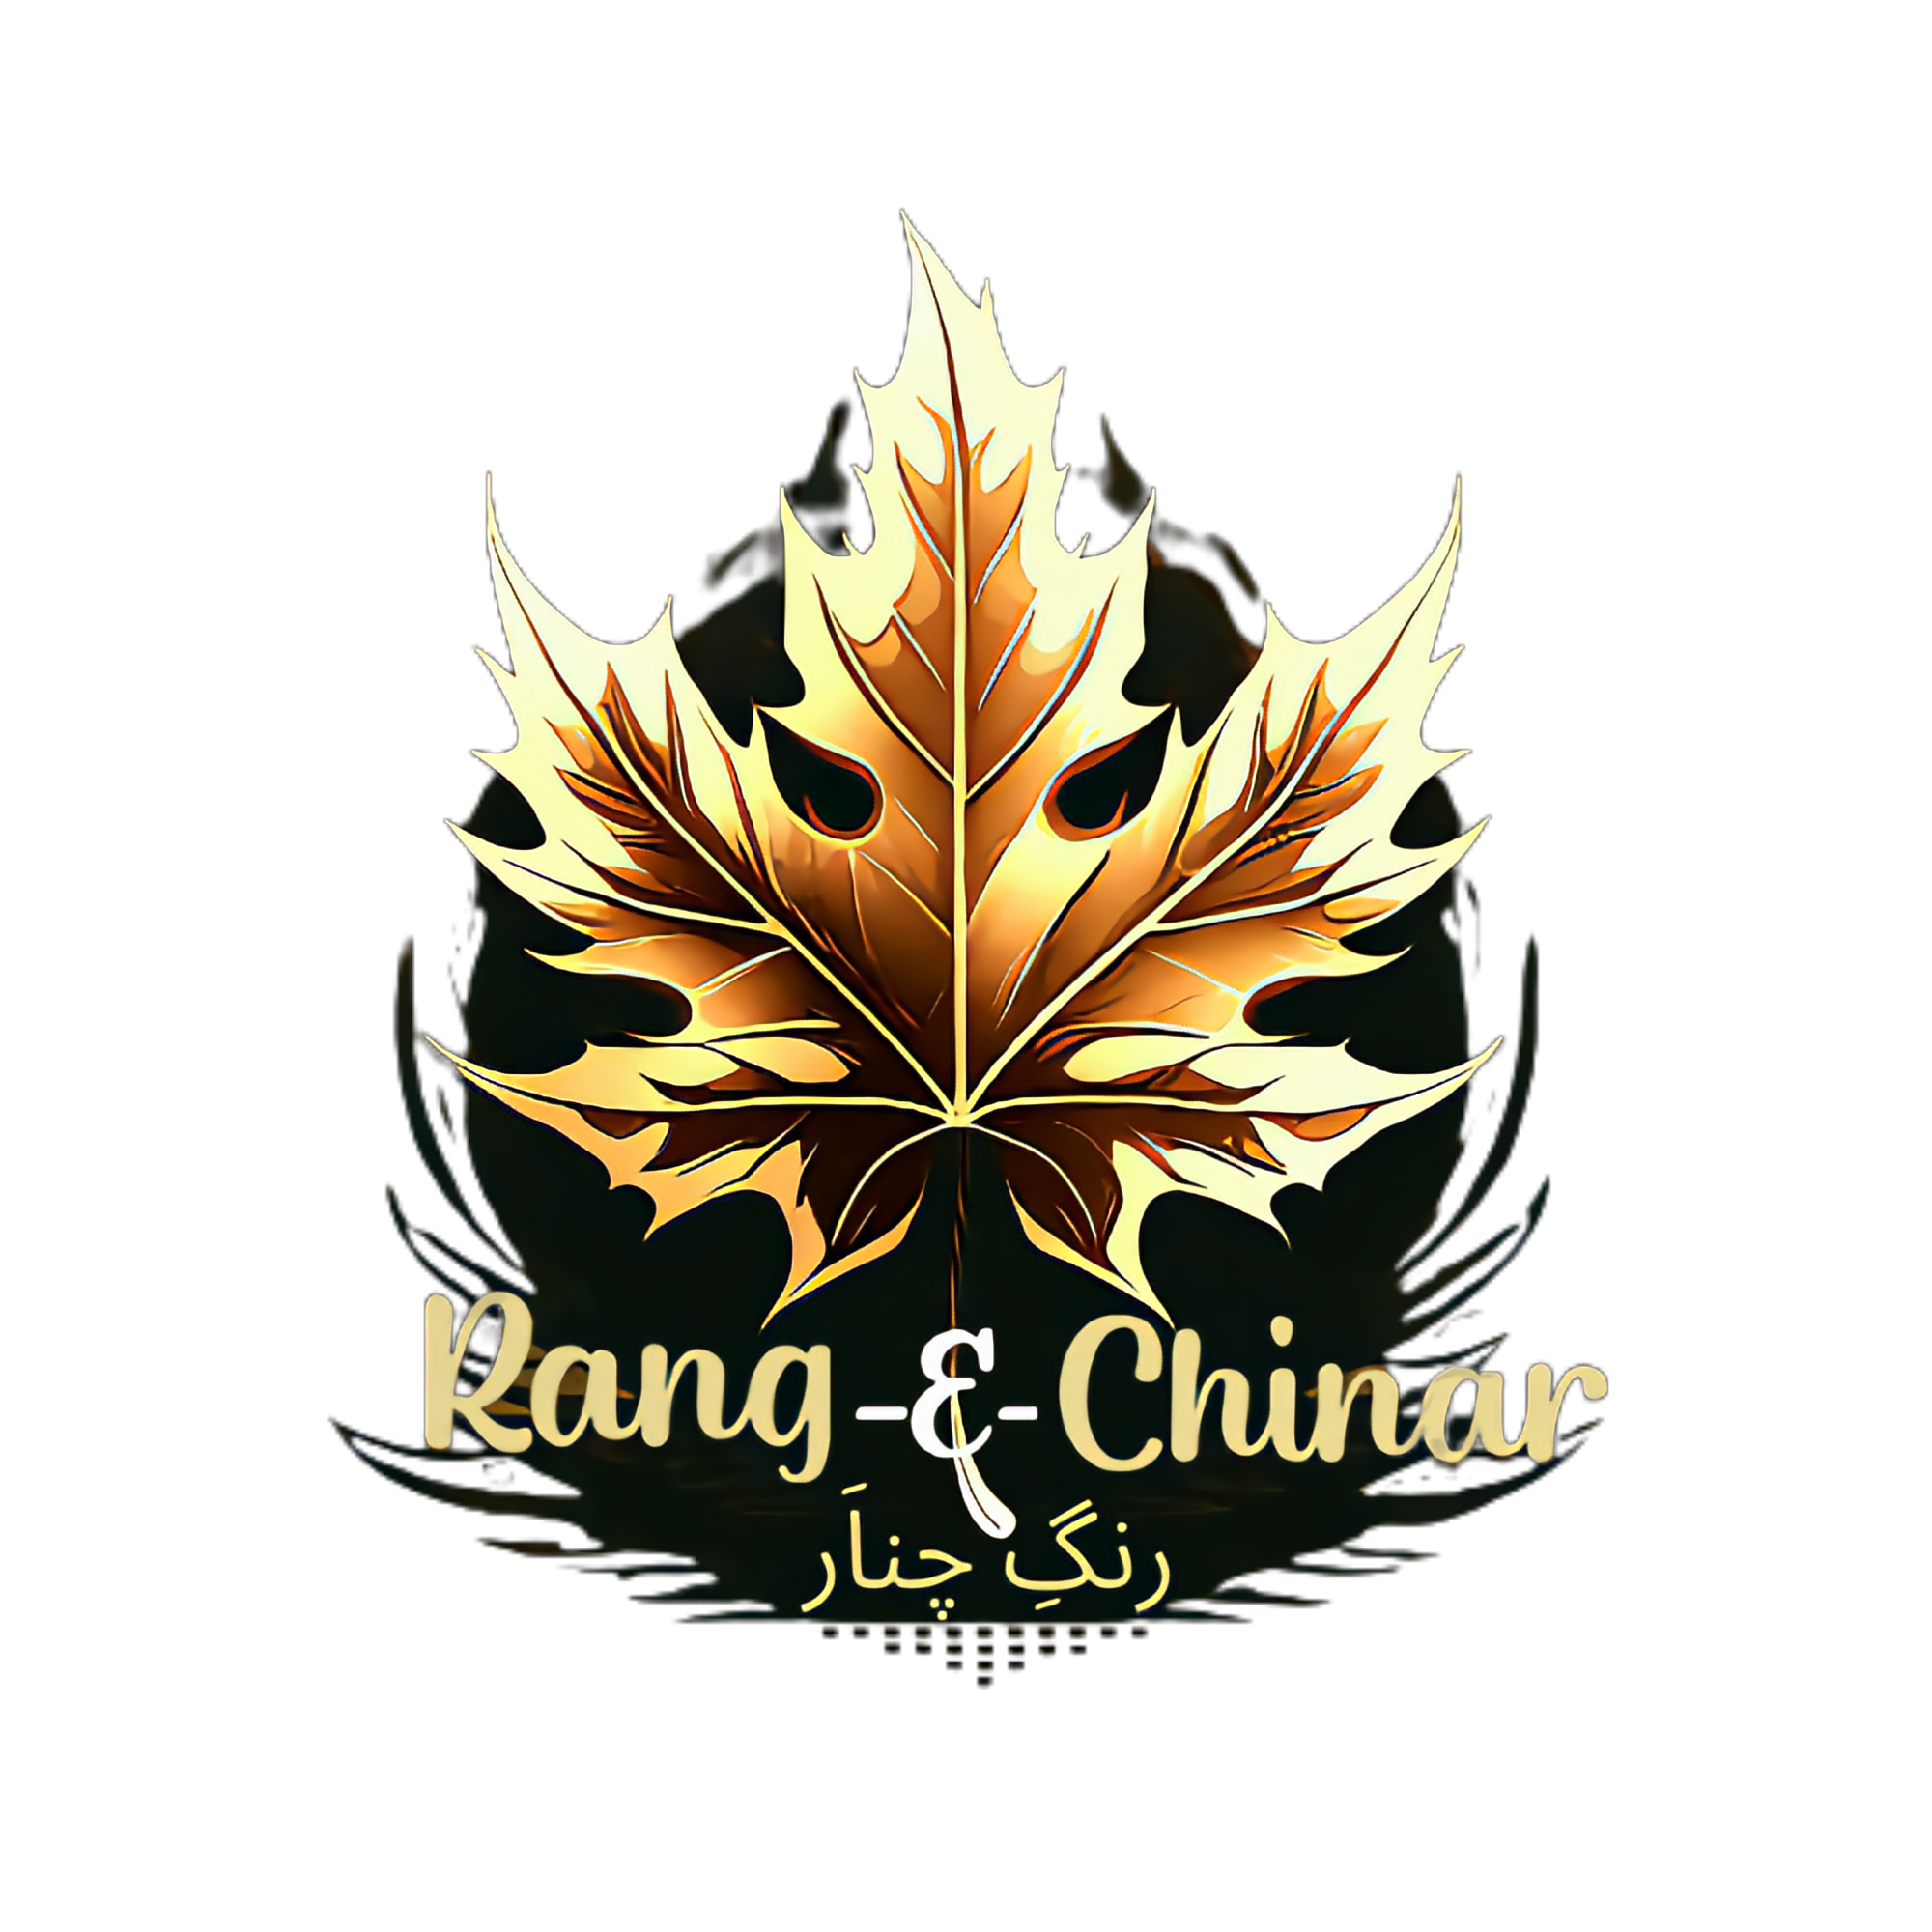 Discover 129+ chinar logo best